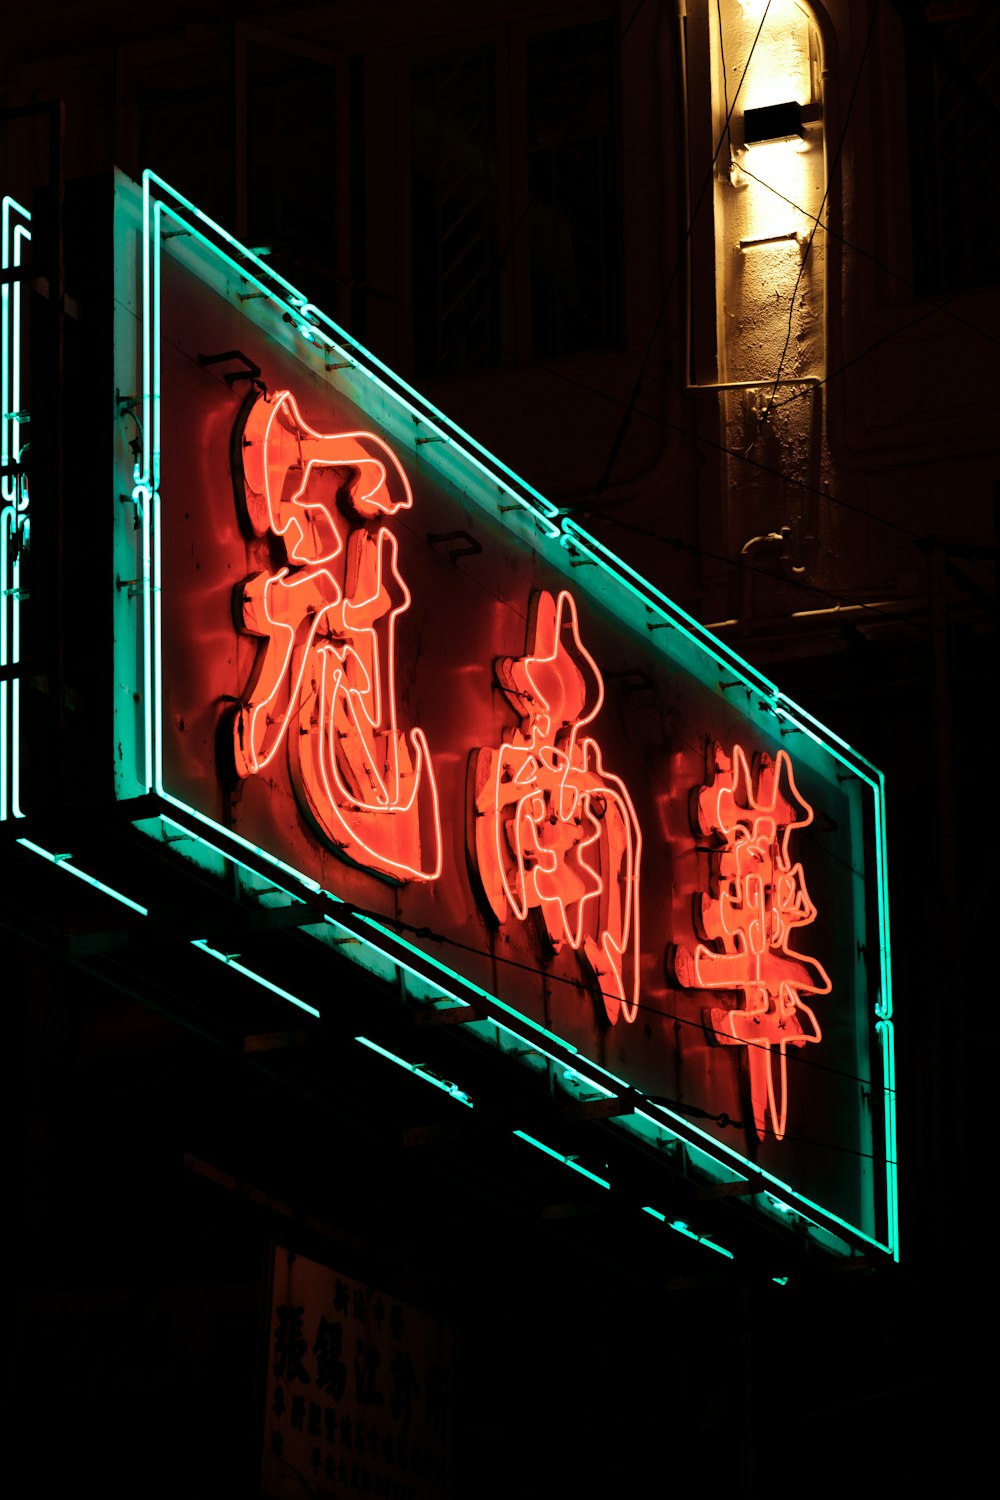 a store front at night